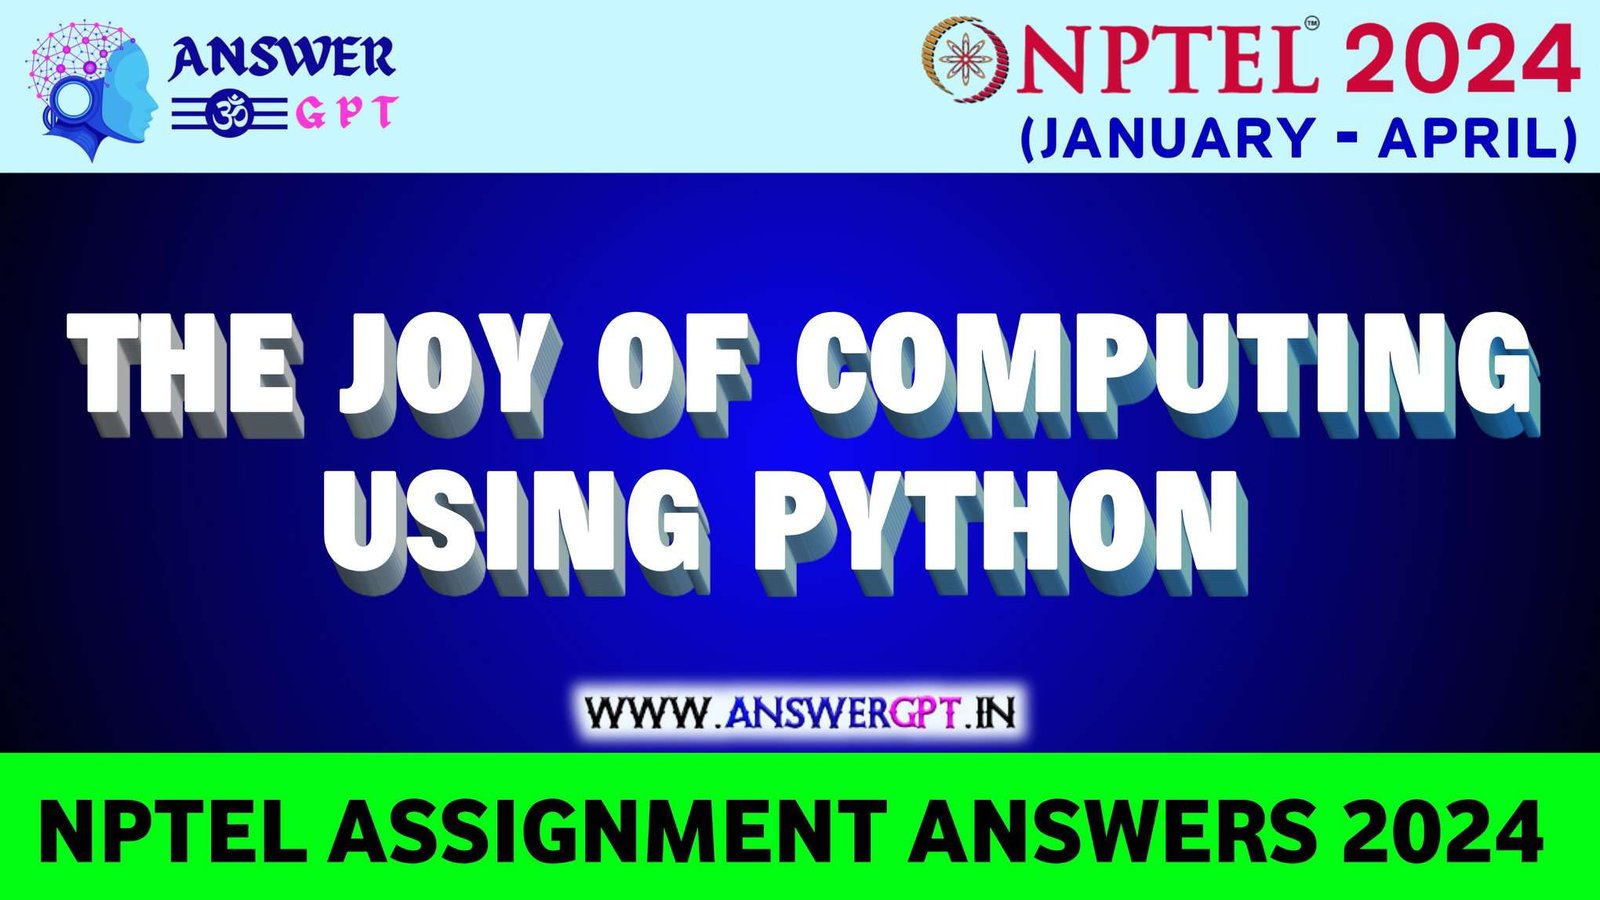 [Week 1-12] NPTEL The Joy of Computing using Python Assignment Answers 2024